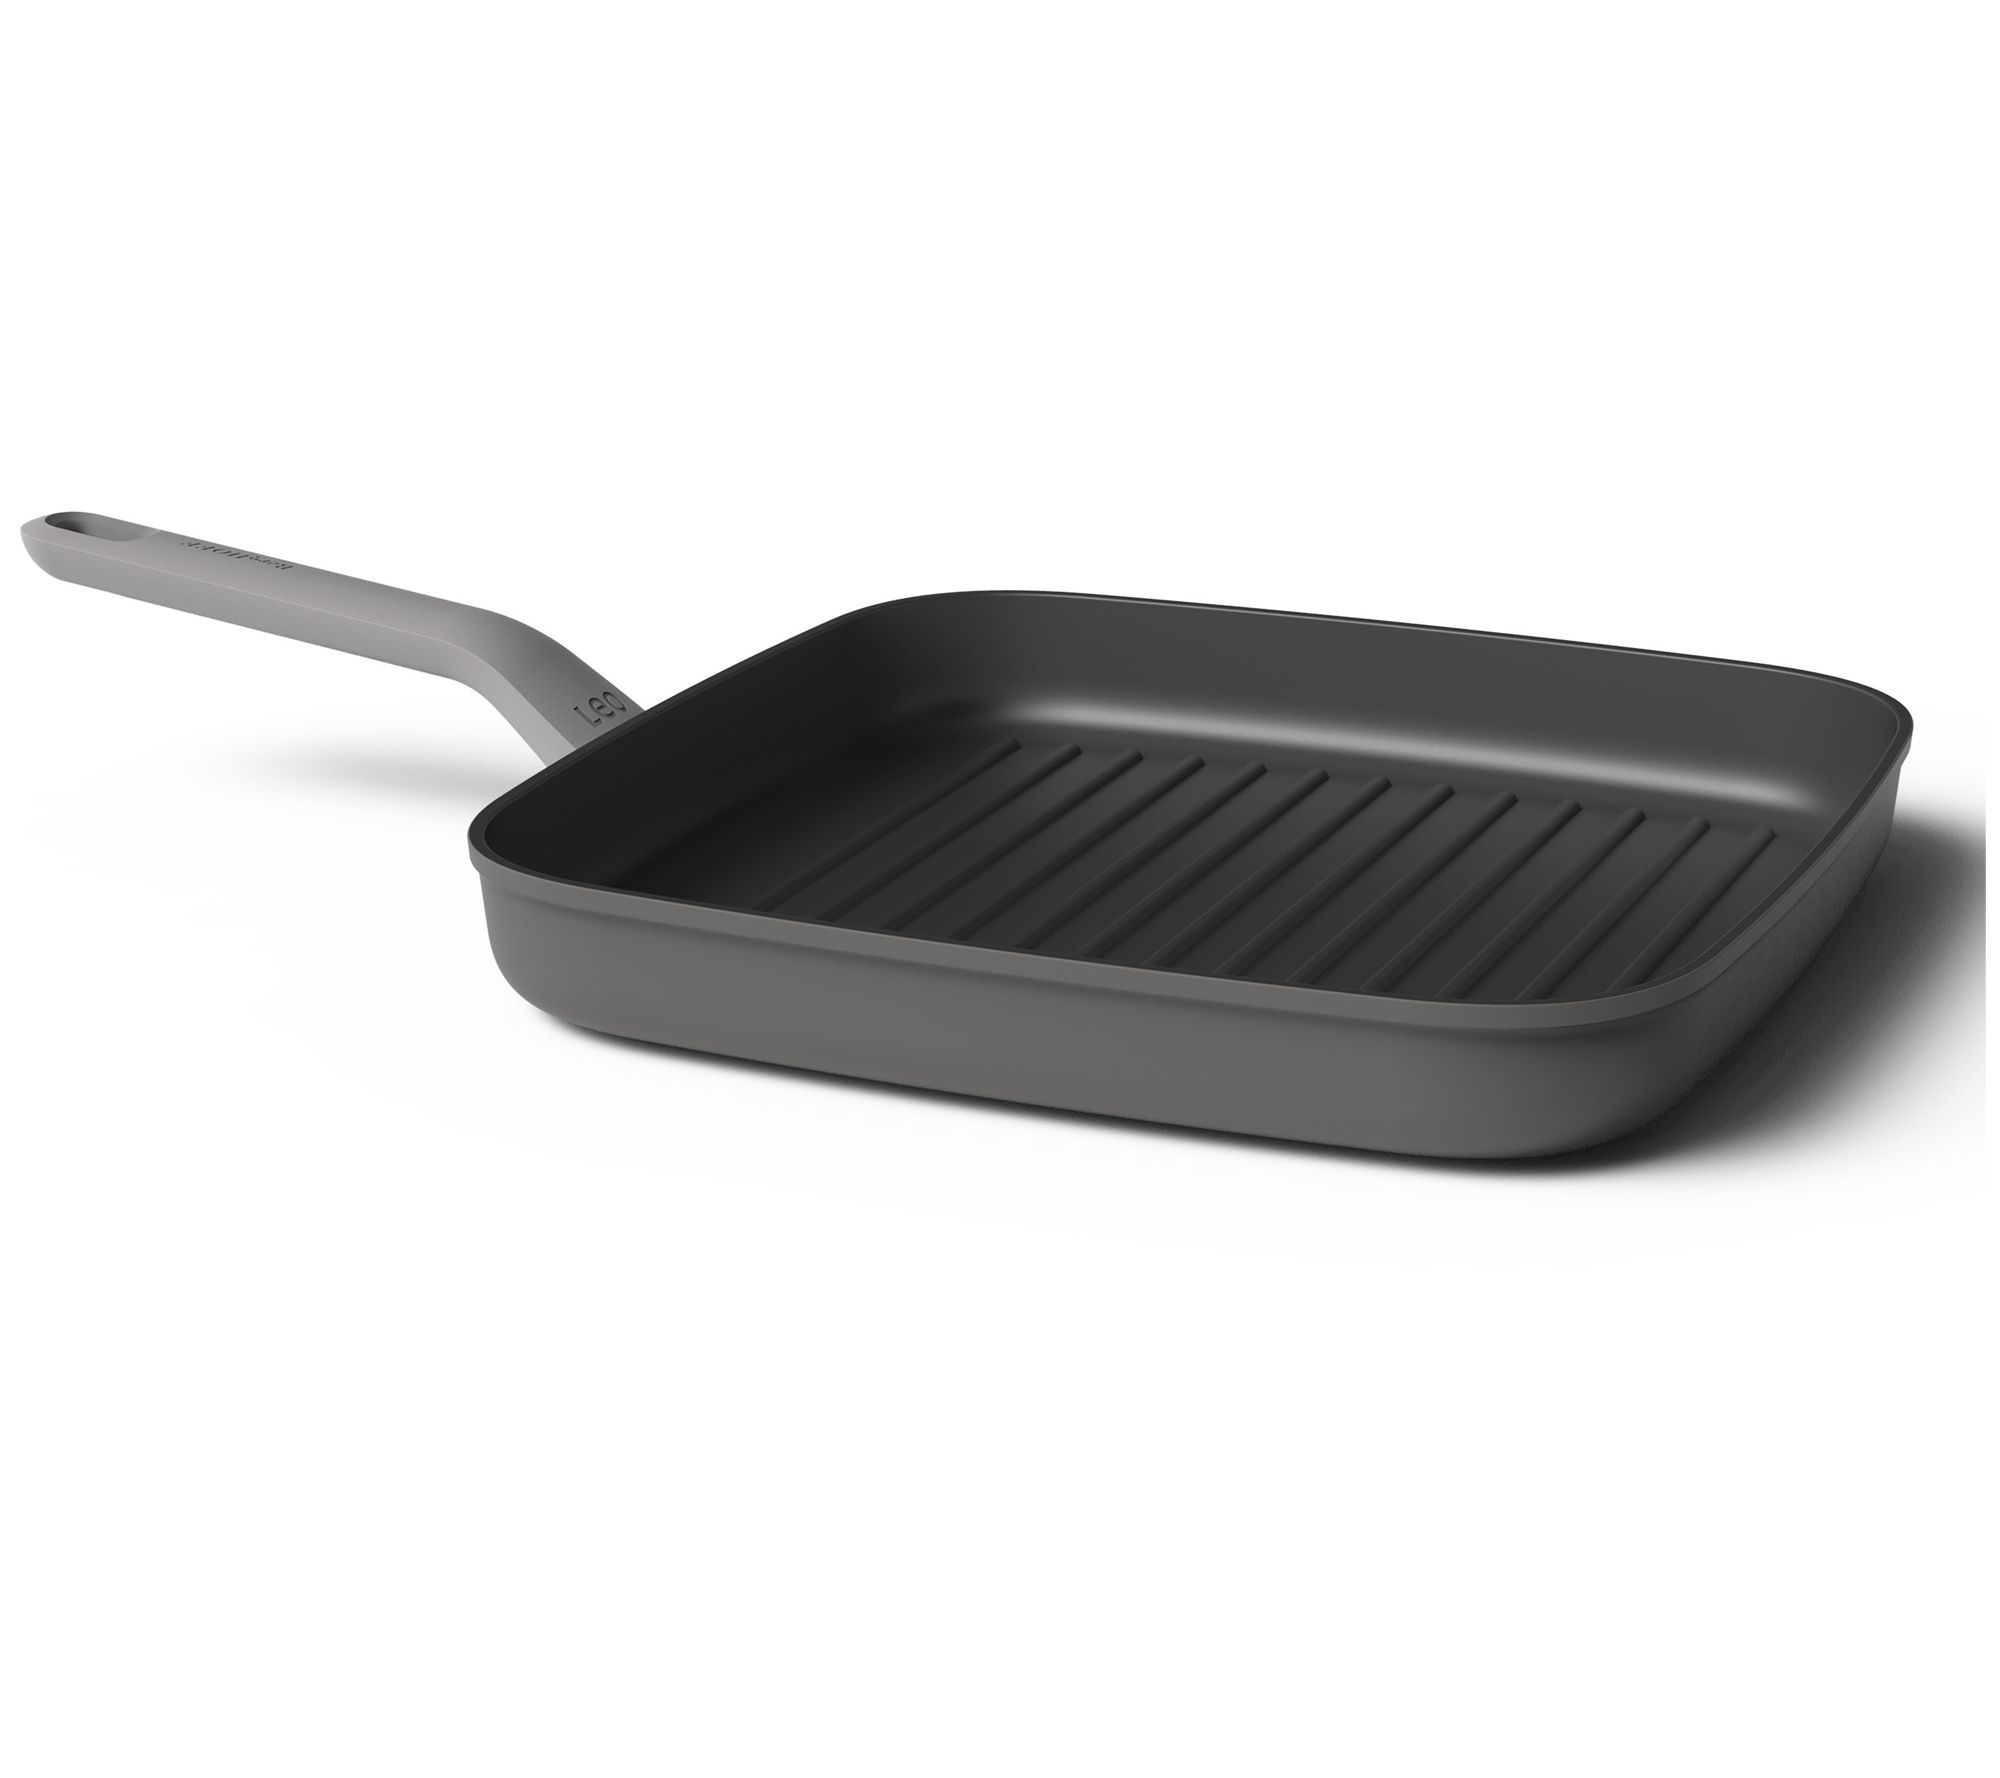 Order a Square Grill Pan That Delivers Appetizing Grill Marks